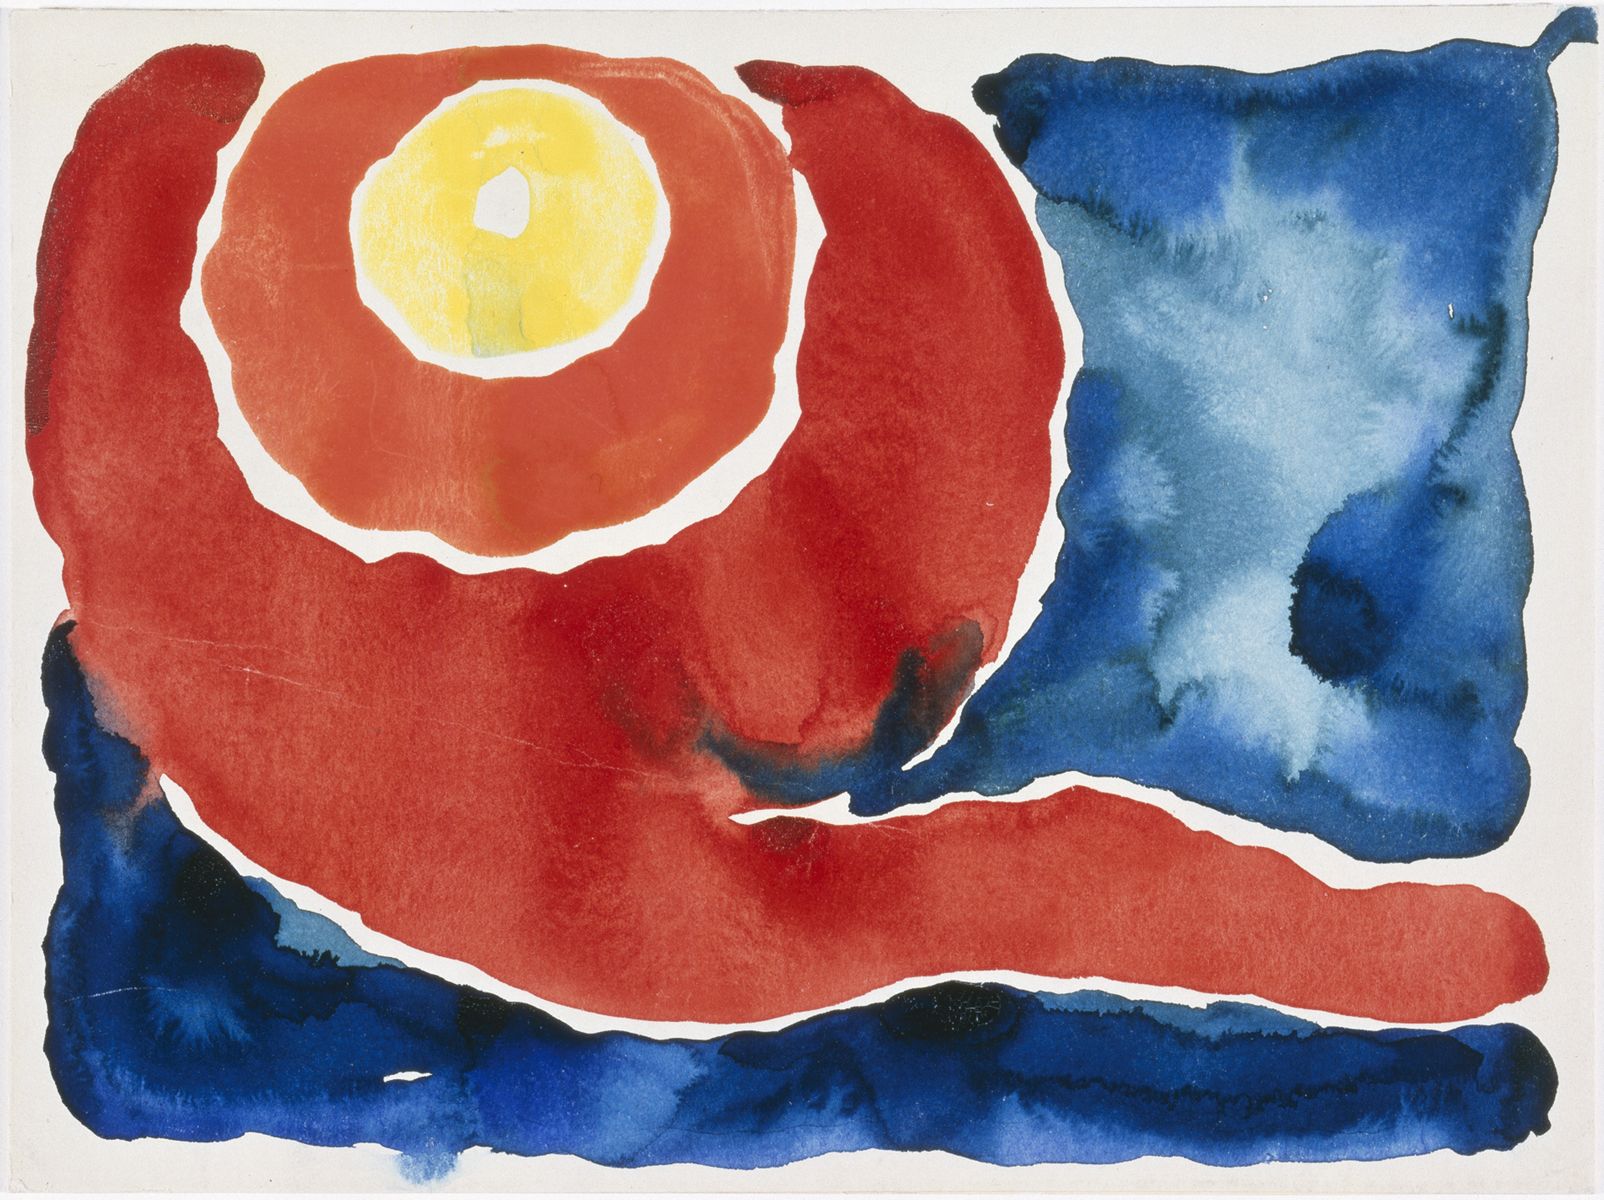 Watercolor. Warm orange and red rings surround a yellow ring near the upper left corner. The rest of the field is filled with pools of shades of lapis blue. The yellow circle is near the upper left corner. The white of the unpainted paper separates it from the clay-orange ring surrounding it, which is then encircled in a red ring. A tail-like line extends from the outer, red ring to stretch to the right edge of the paper. The blue paint of the sky touches the red ring along the left edge and near the red line so blue and red bleed together in those two areas. The blue areas are especially mottled with wet-on-wet blue pigment.